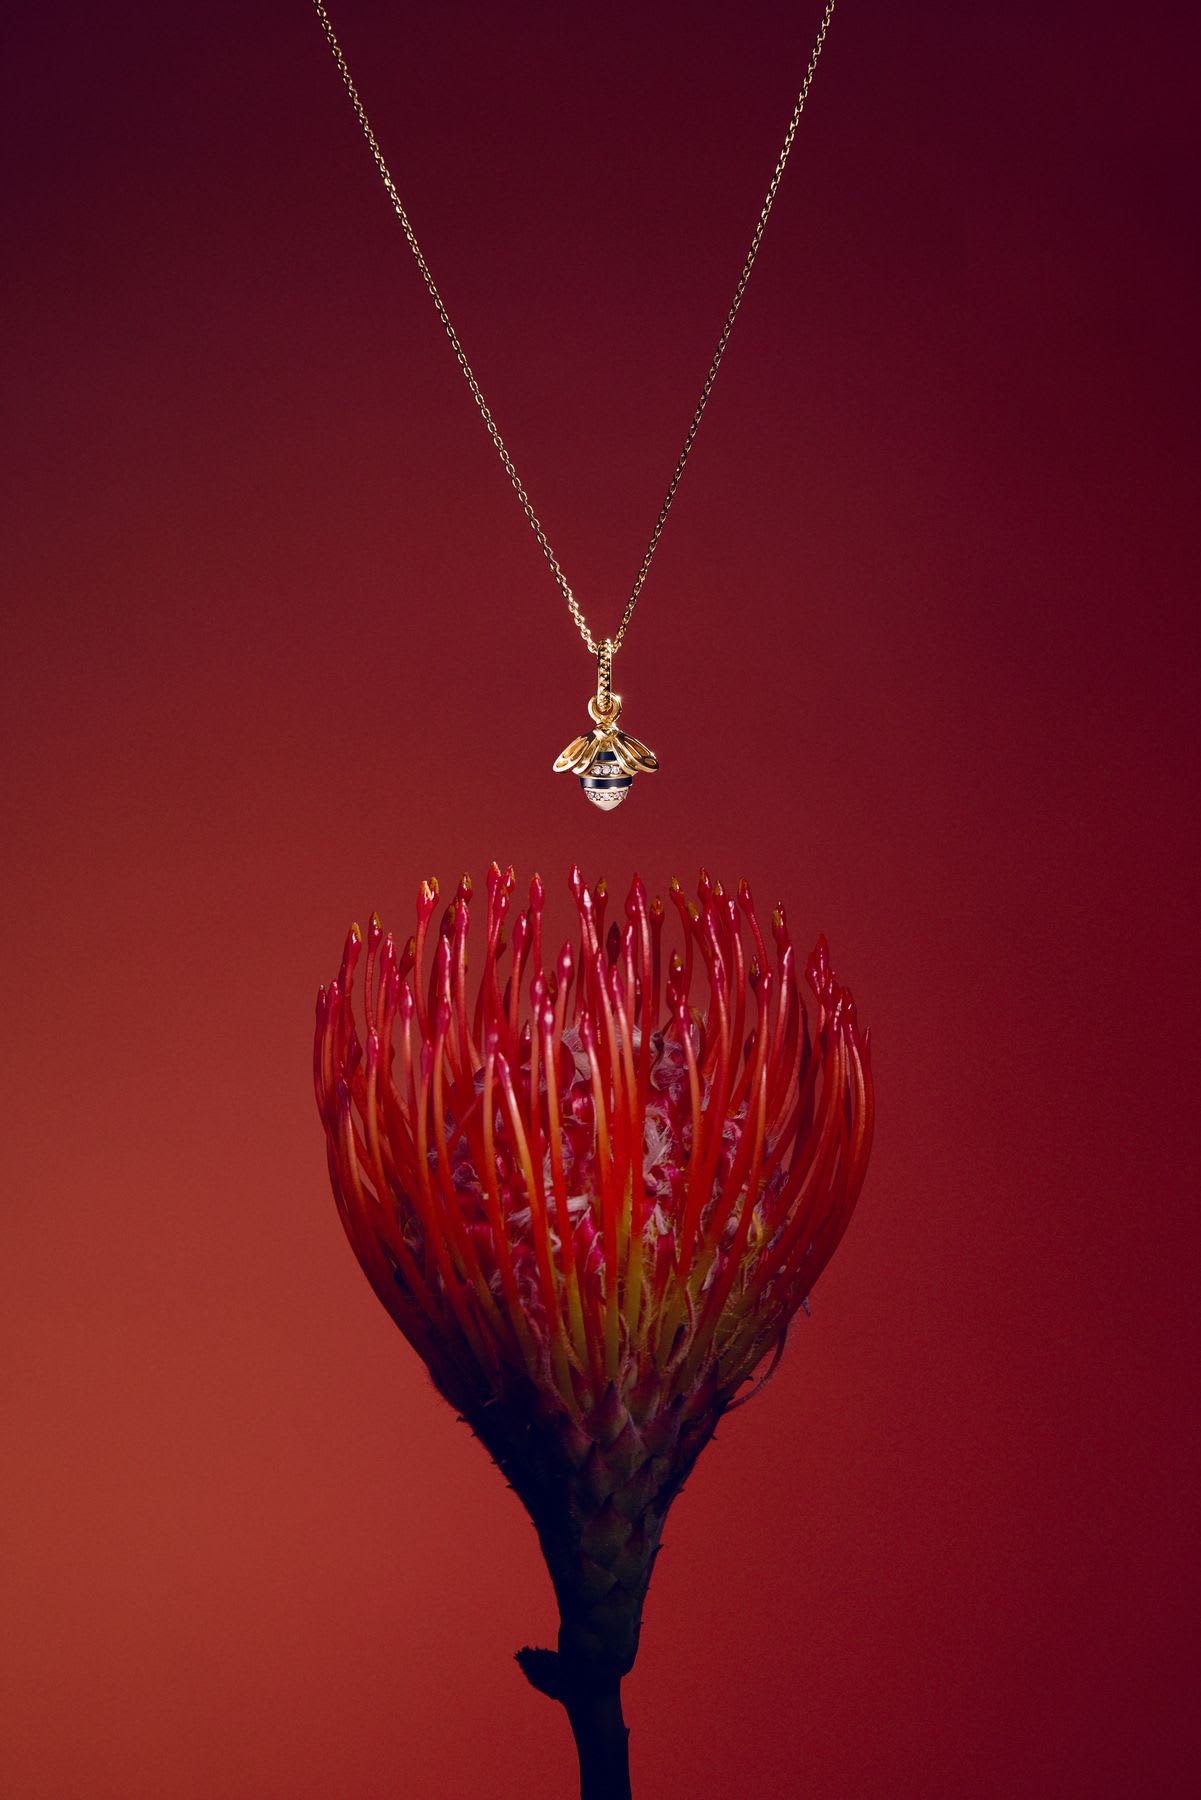 A gold honeybee necklace pendant hanging over a red pincushion flower